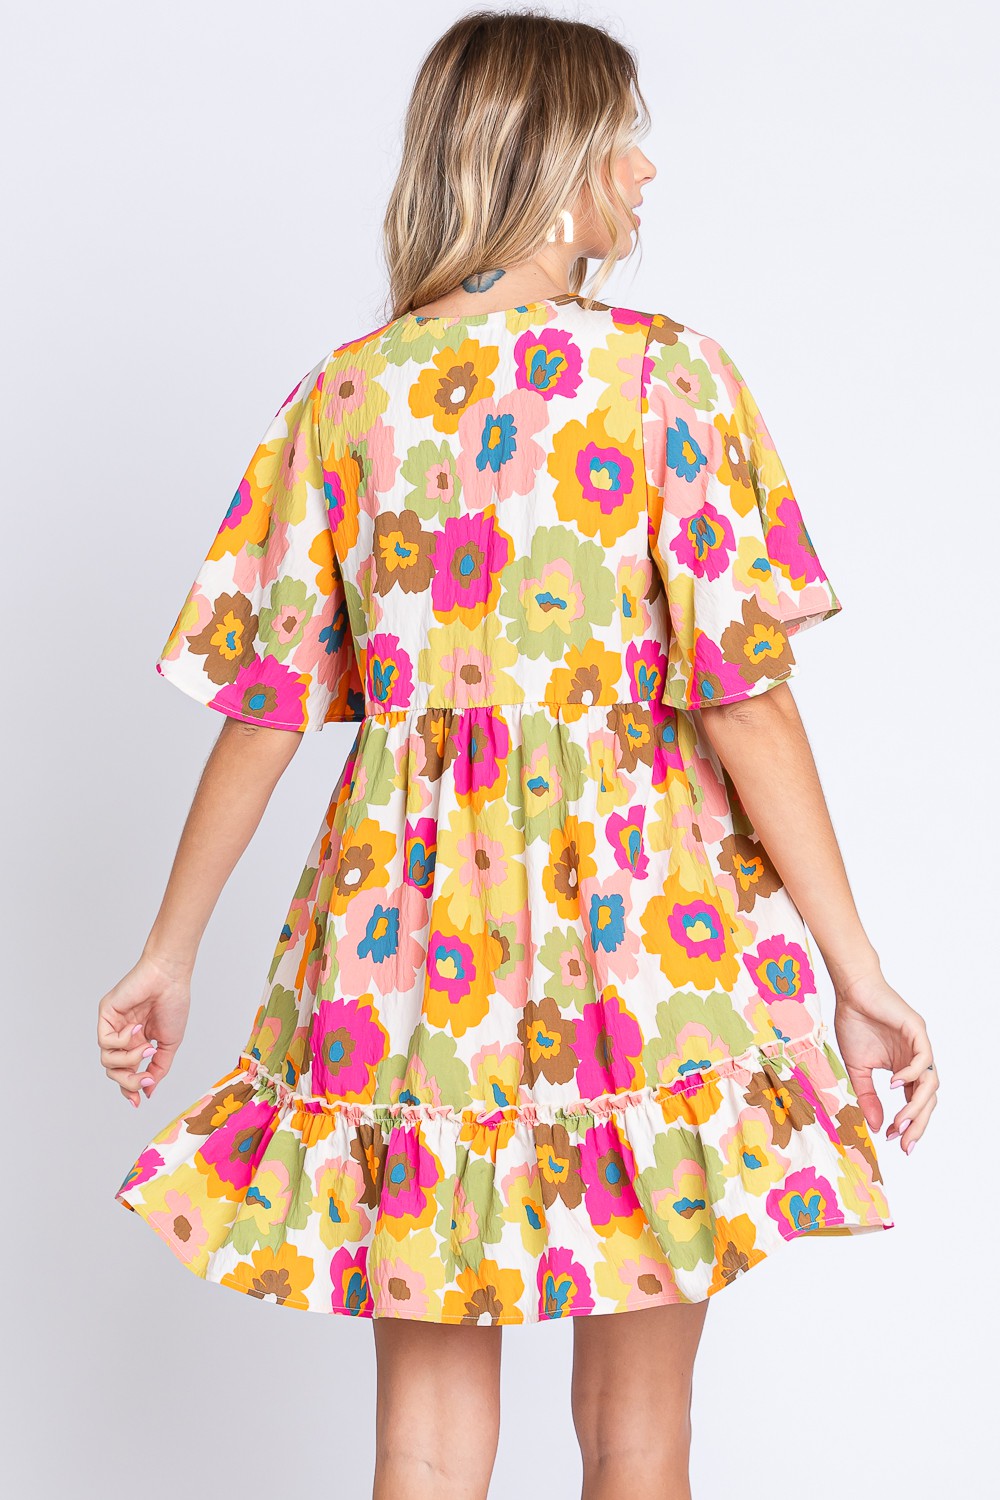 Here Comes the Sun Floral Mini Dress - Cheeky Chic Boutique